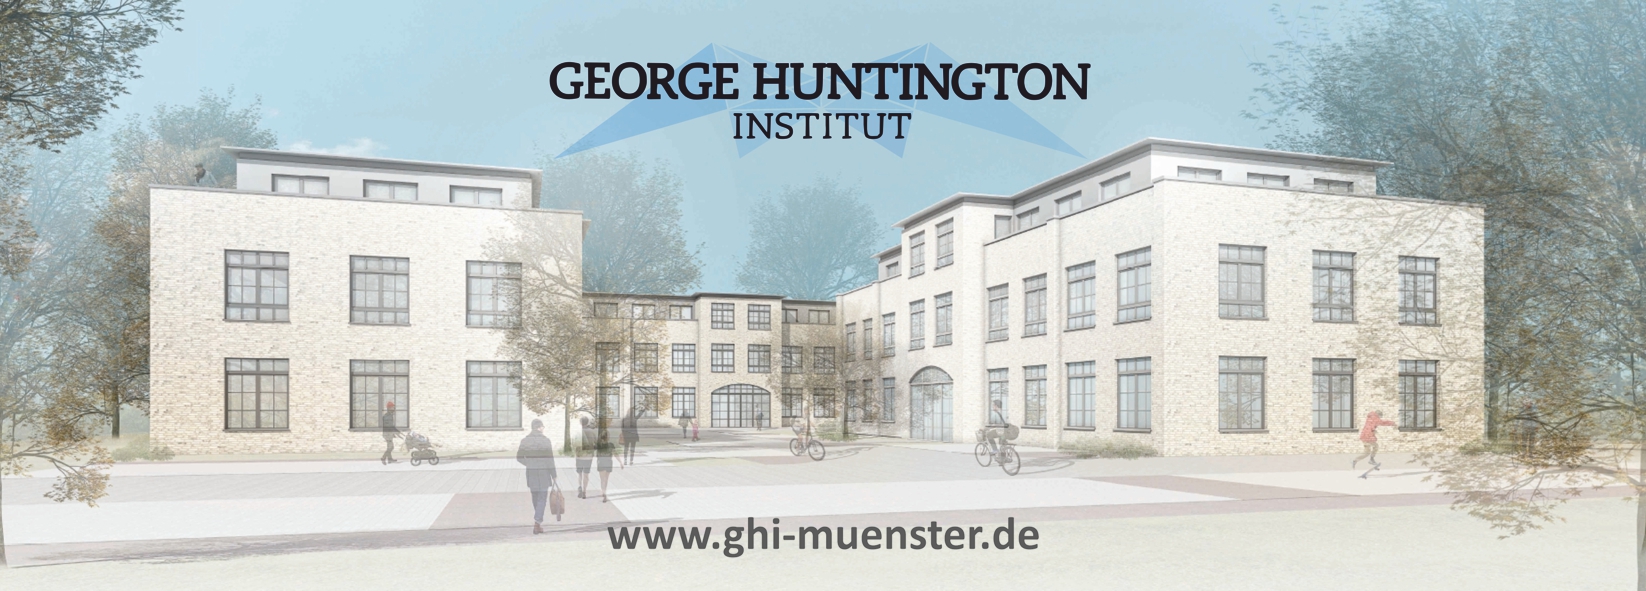 Welcome to the George-Huntington-Institute